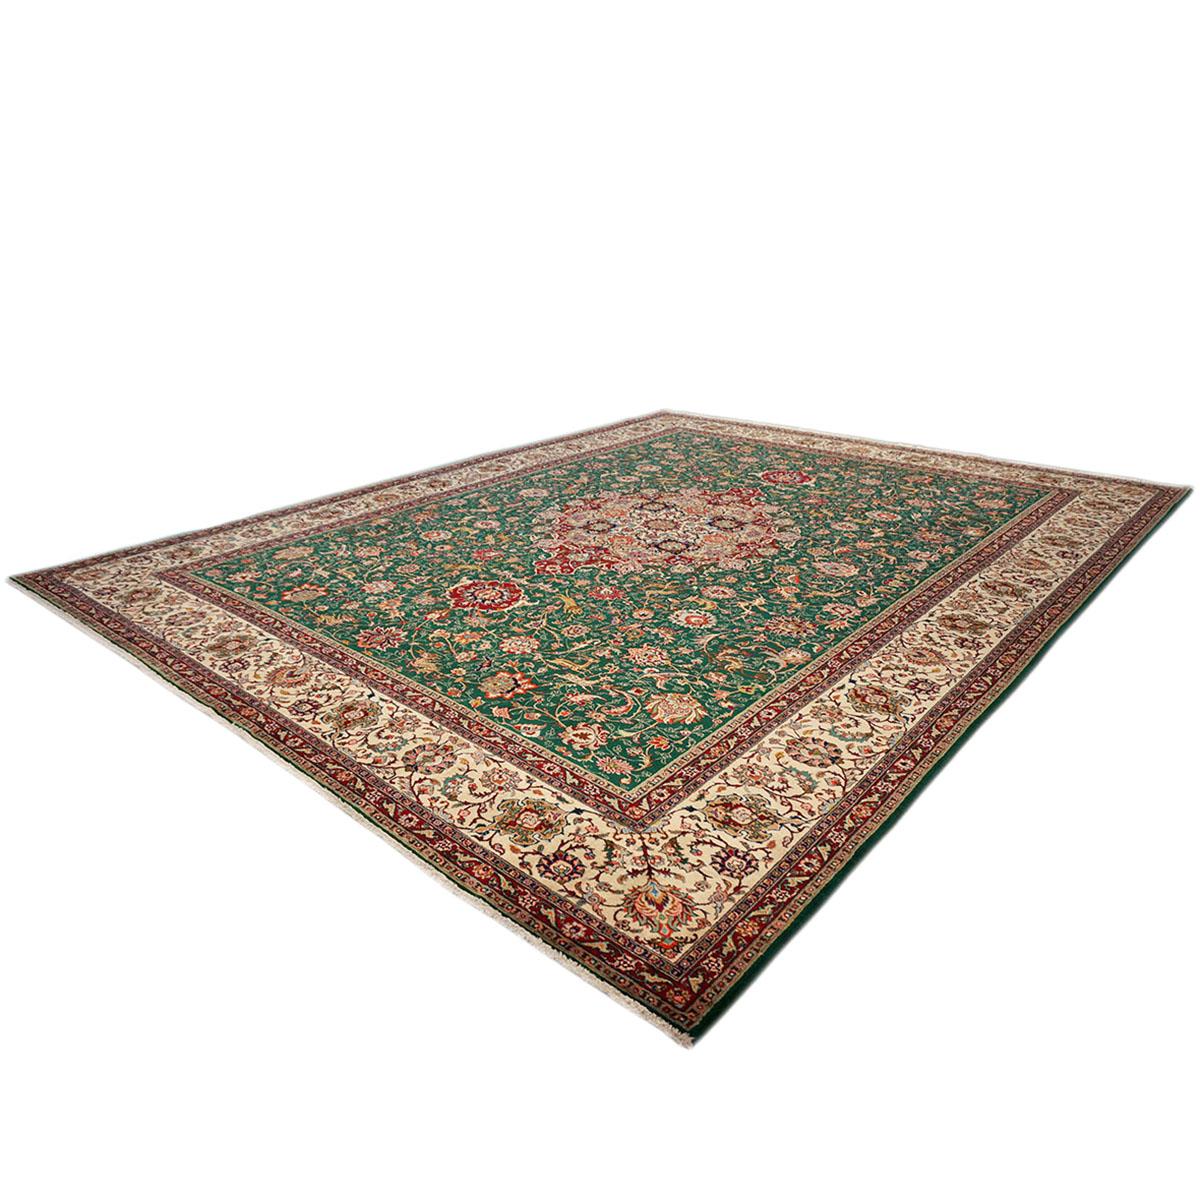 Antique Persian Tabriz 9x12 Green, Red, & Ivory Handmade Area Rug In Good Condition For Sale In Houston, TX